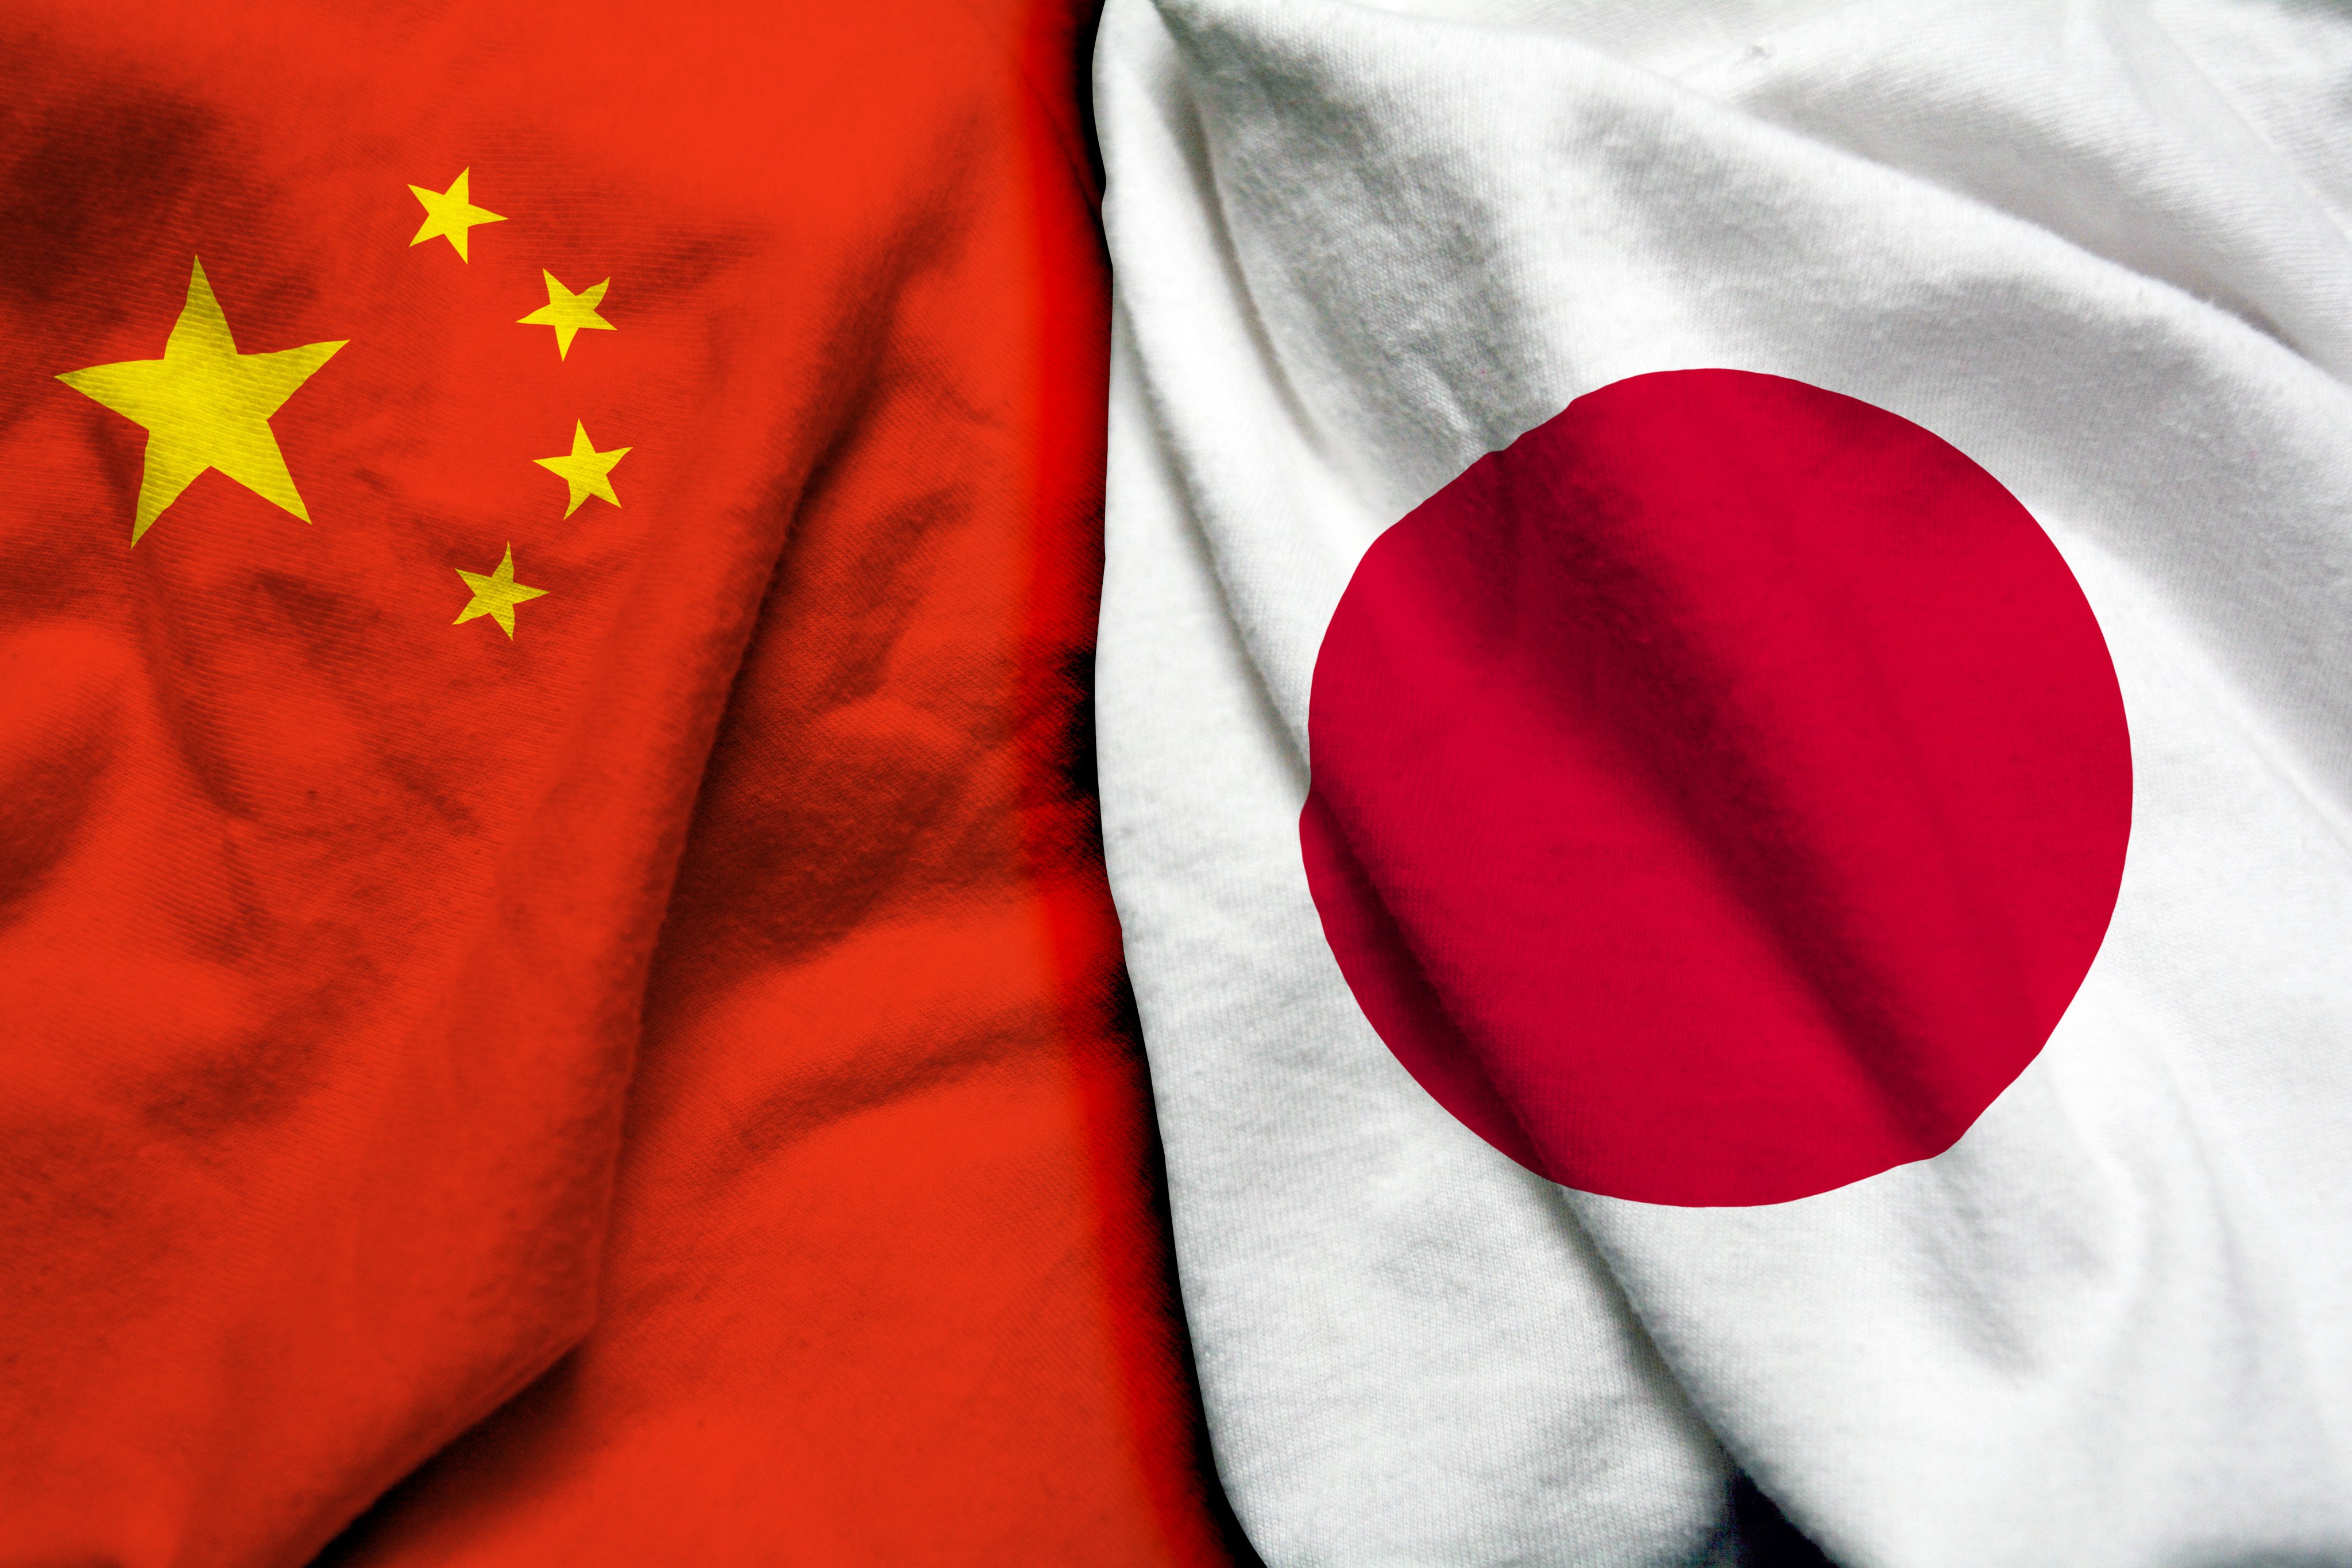 Japan’s ambassador to Beijing has urged China to revive a visa-free policy for Japanese nationals. Photo: Shutterstock 